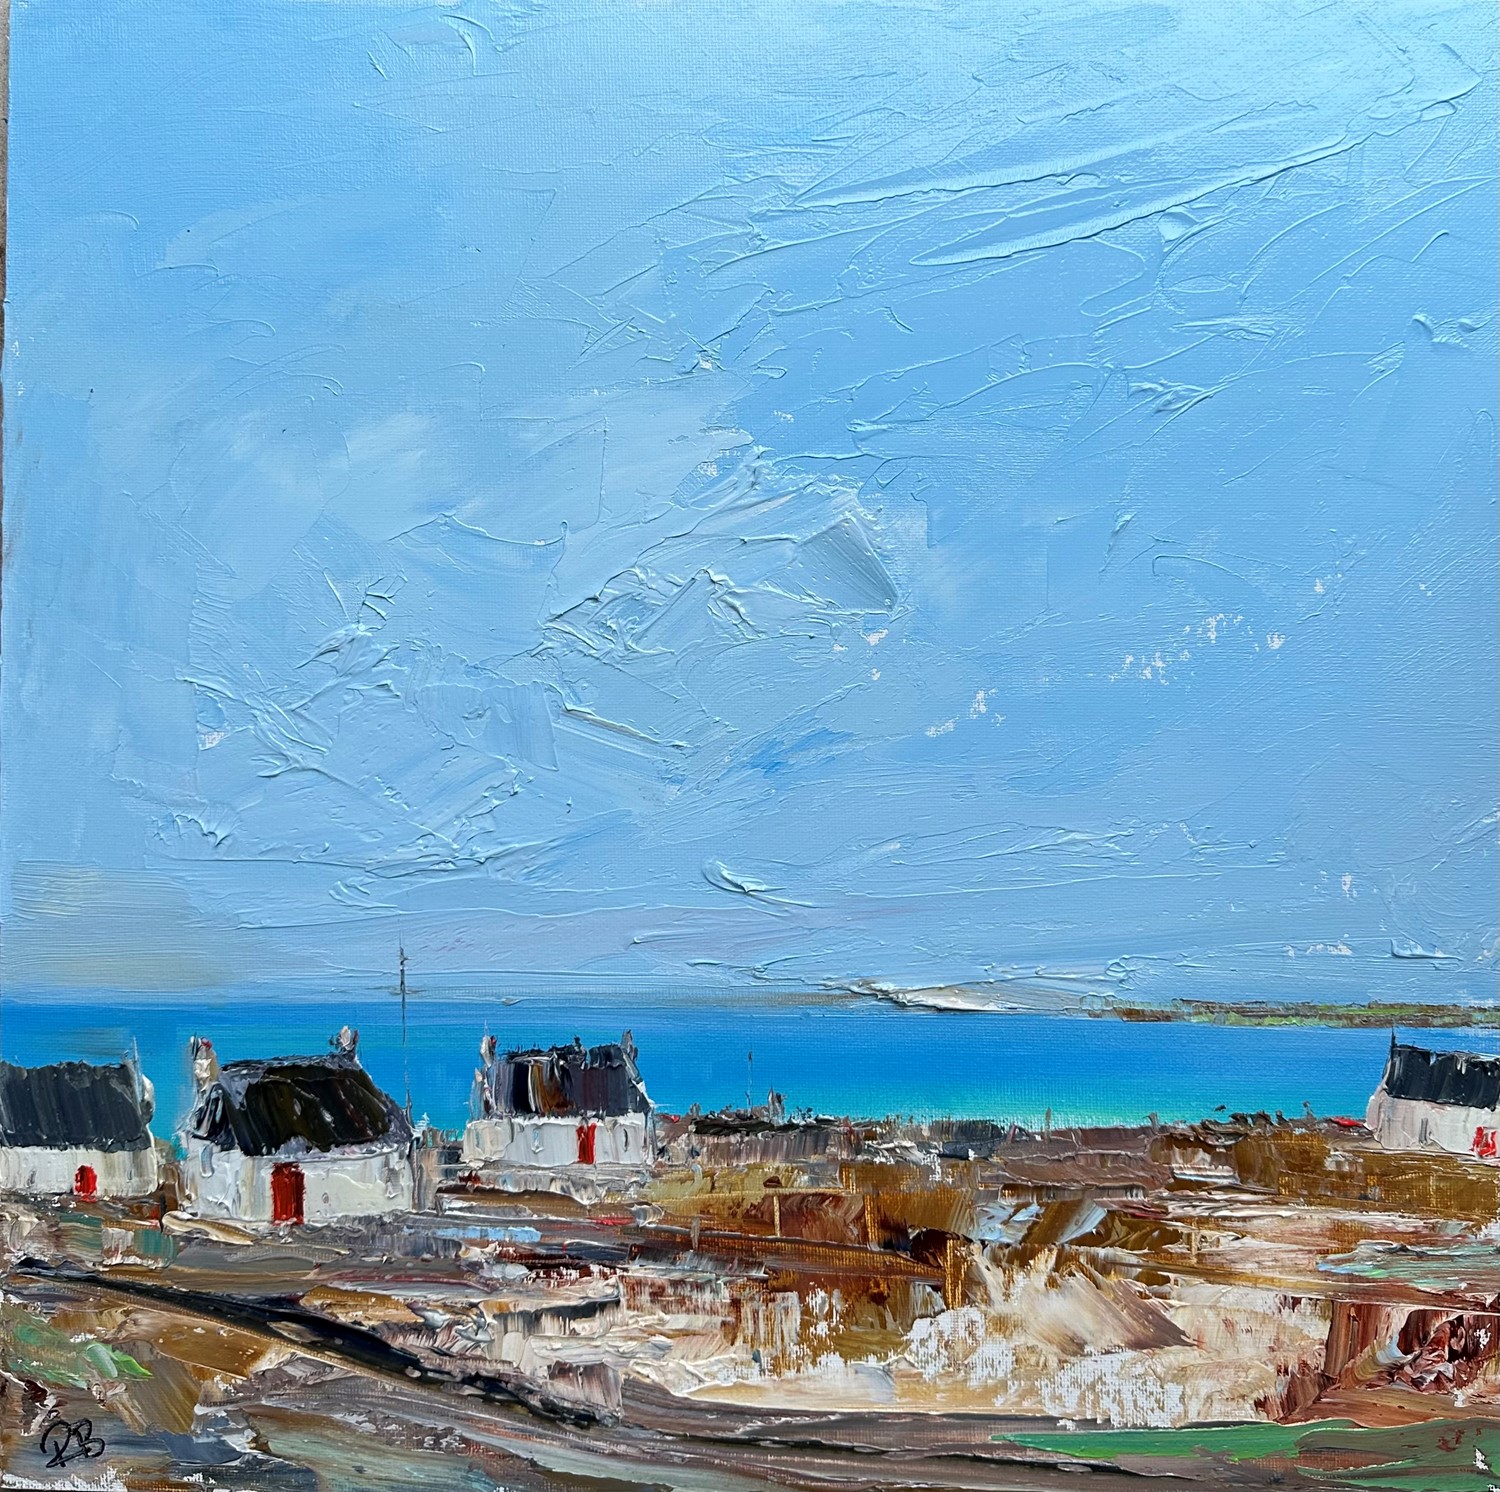 'Community by the sea' by artist Rosanne Barr